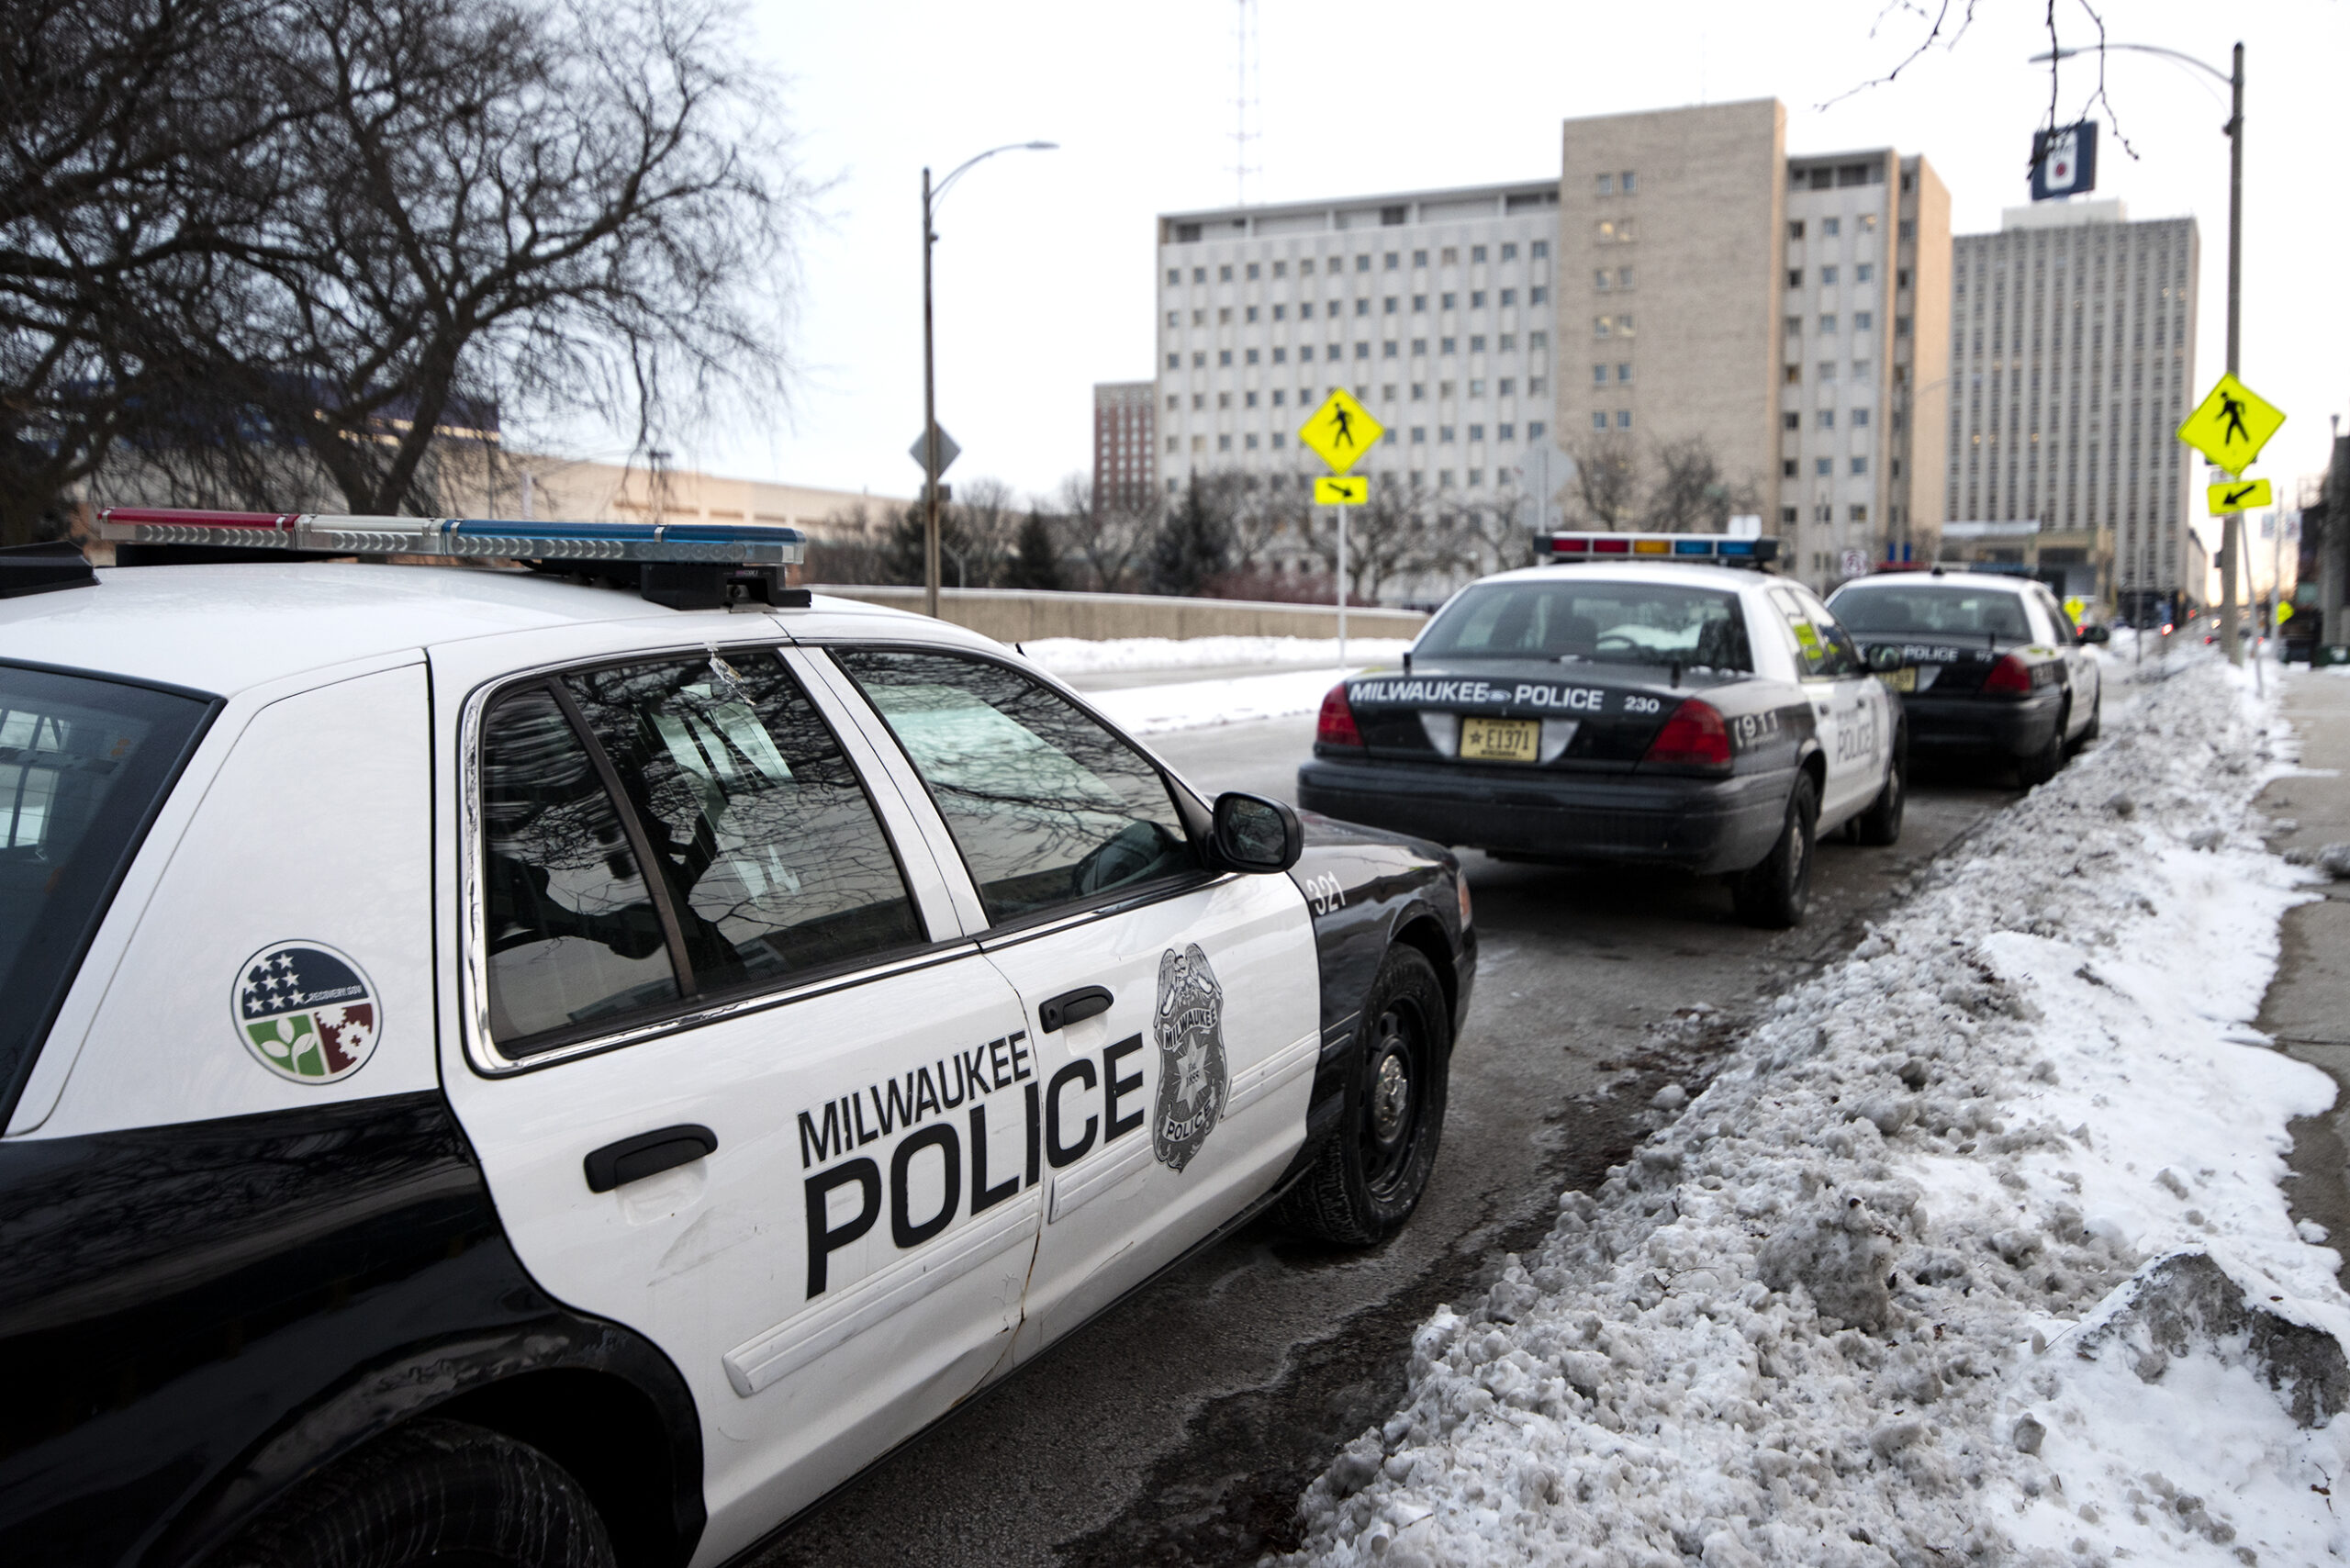 Three Milwaukee police cars are parked on a snowy street.